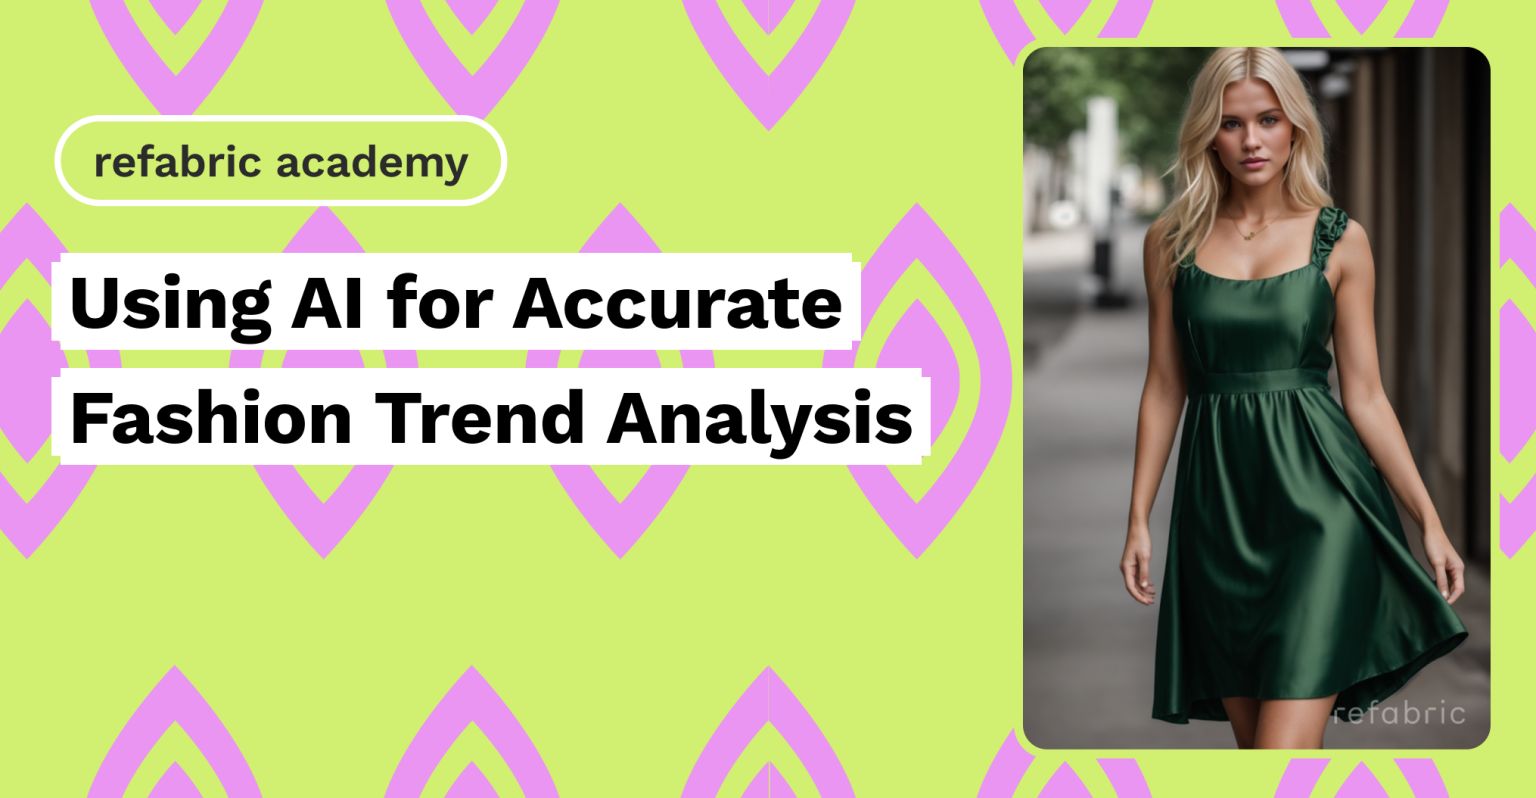 Using AI for Accurate Fashion Trend Analysis - Refabric